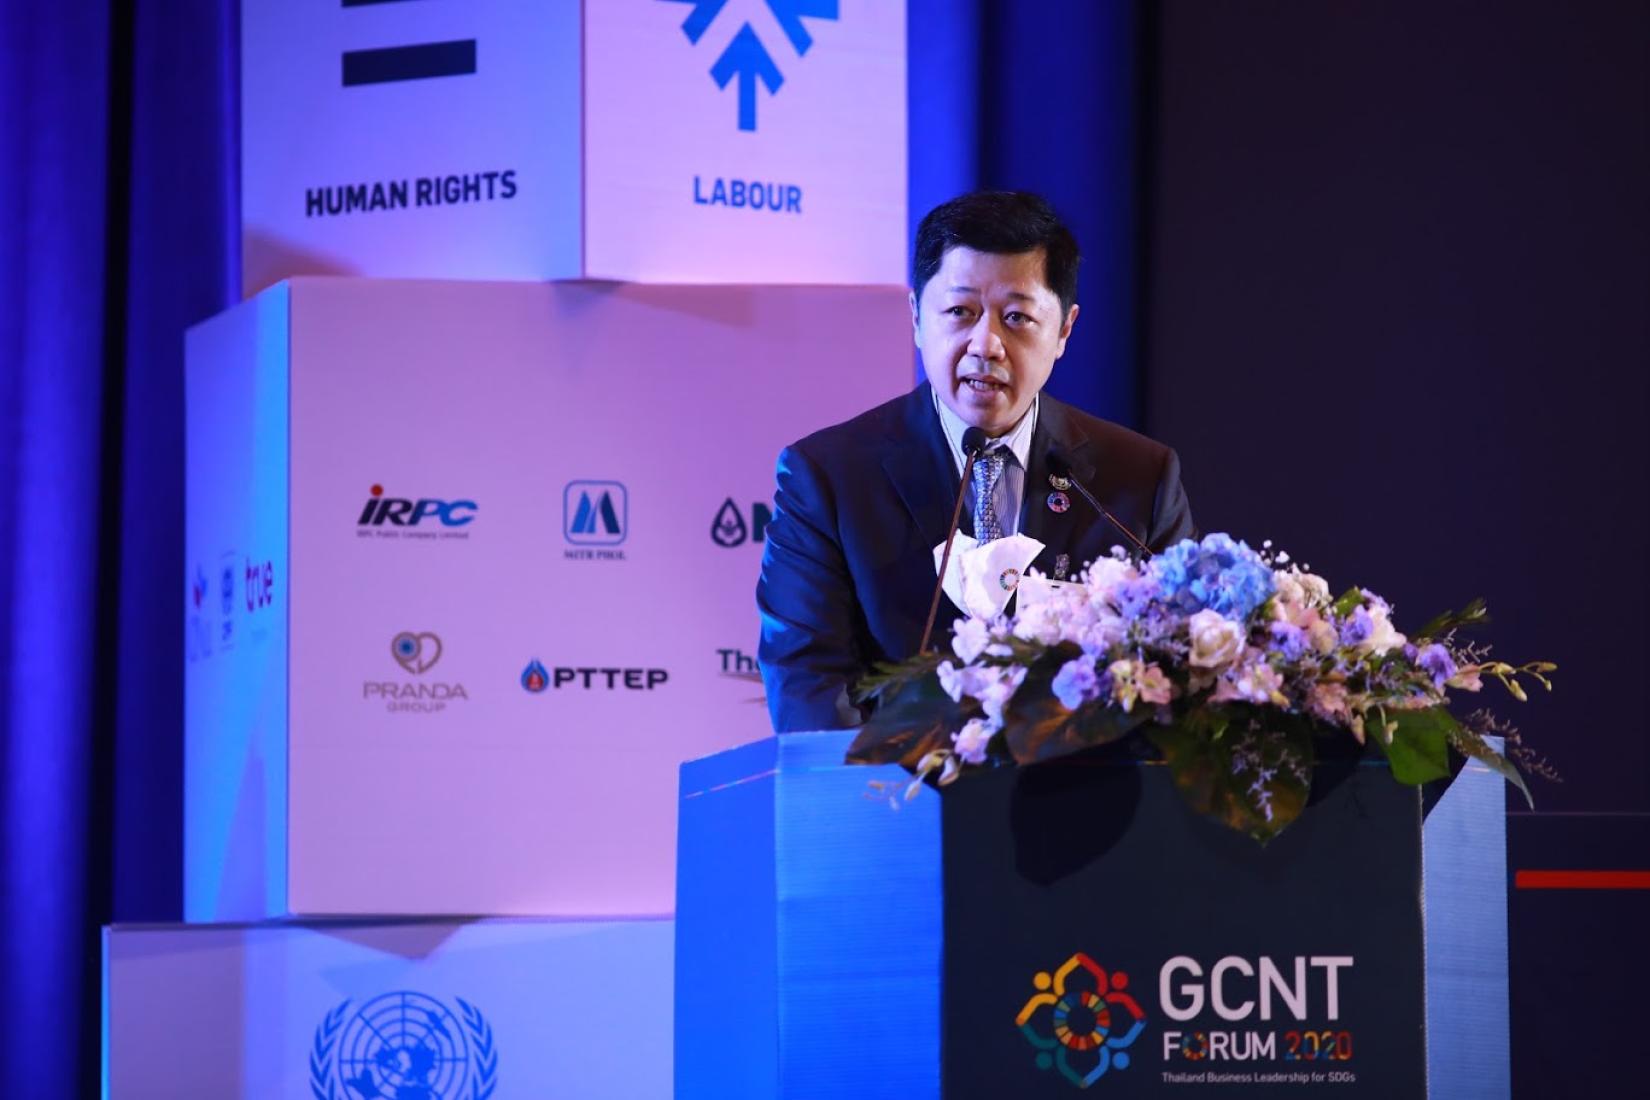 Suphachai Chearavanont, CEO of CP Group, Bangkok, and Chairperson of UN Global Compact Thailand